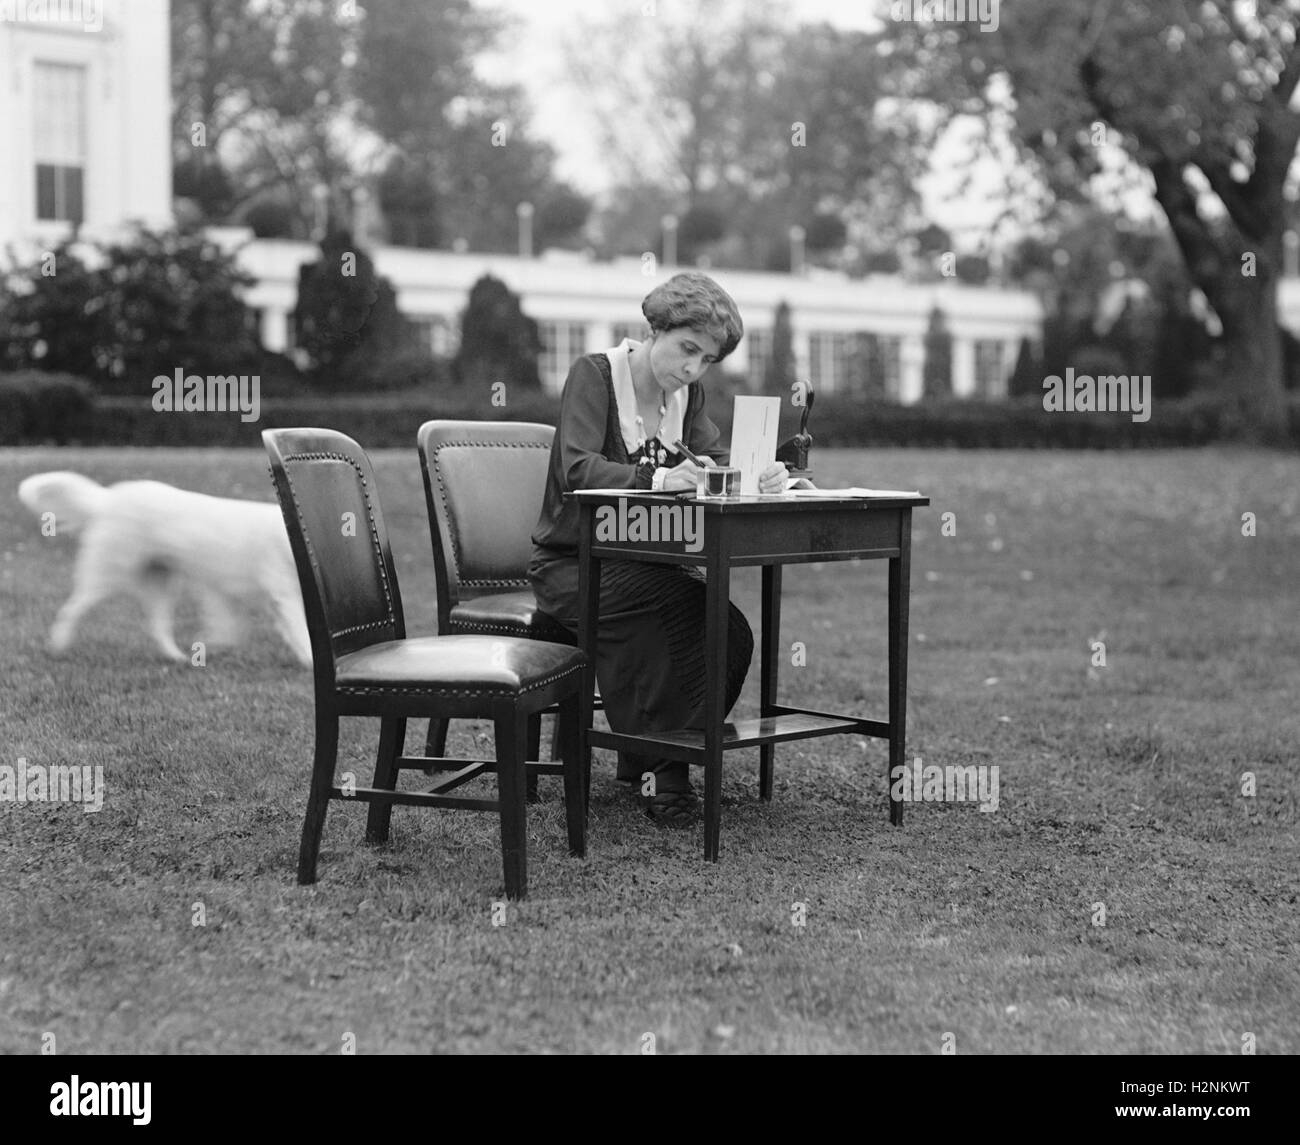 First Lady Grace Coolidge Voting by Mail, White House Lawn, Washington DC, USA, National Photo Company, October 30, 1924 Stock Photo